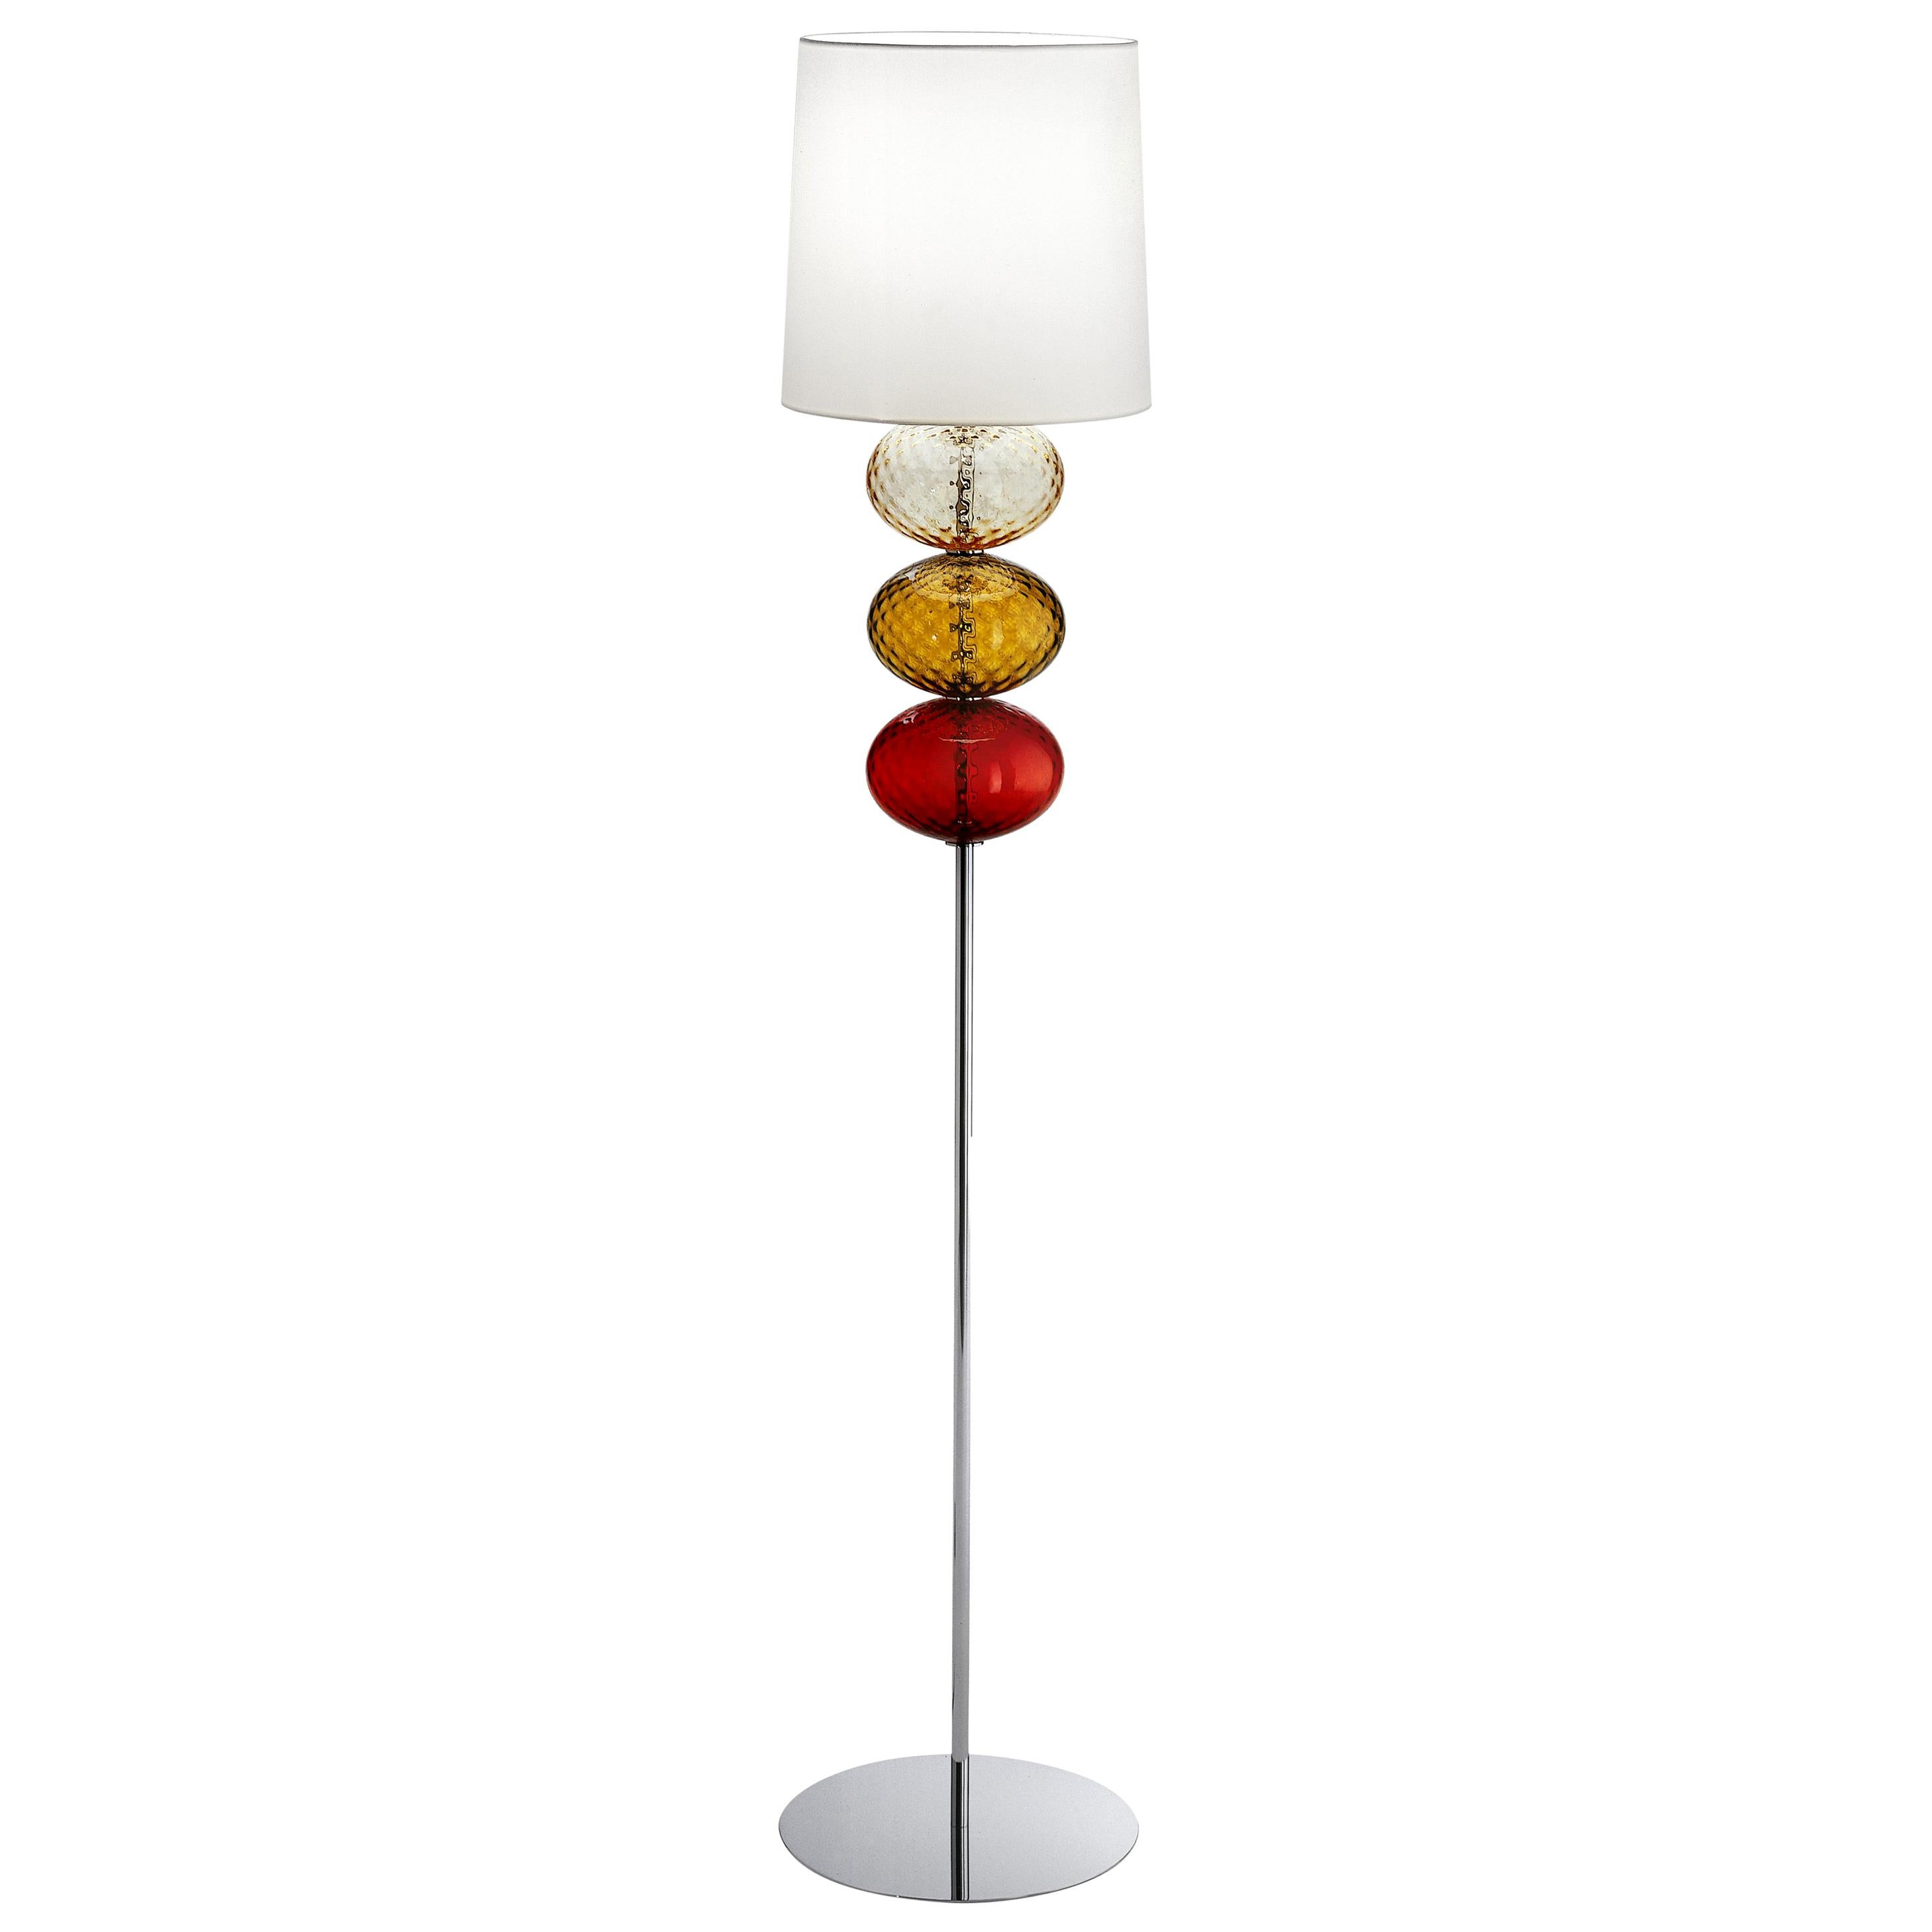 Venini Abat Jour Terra Floor Lamp in Red, Tea, and Amber with White Shade